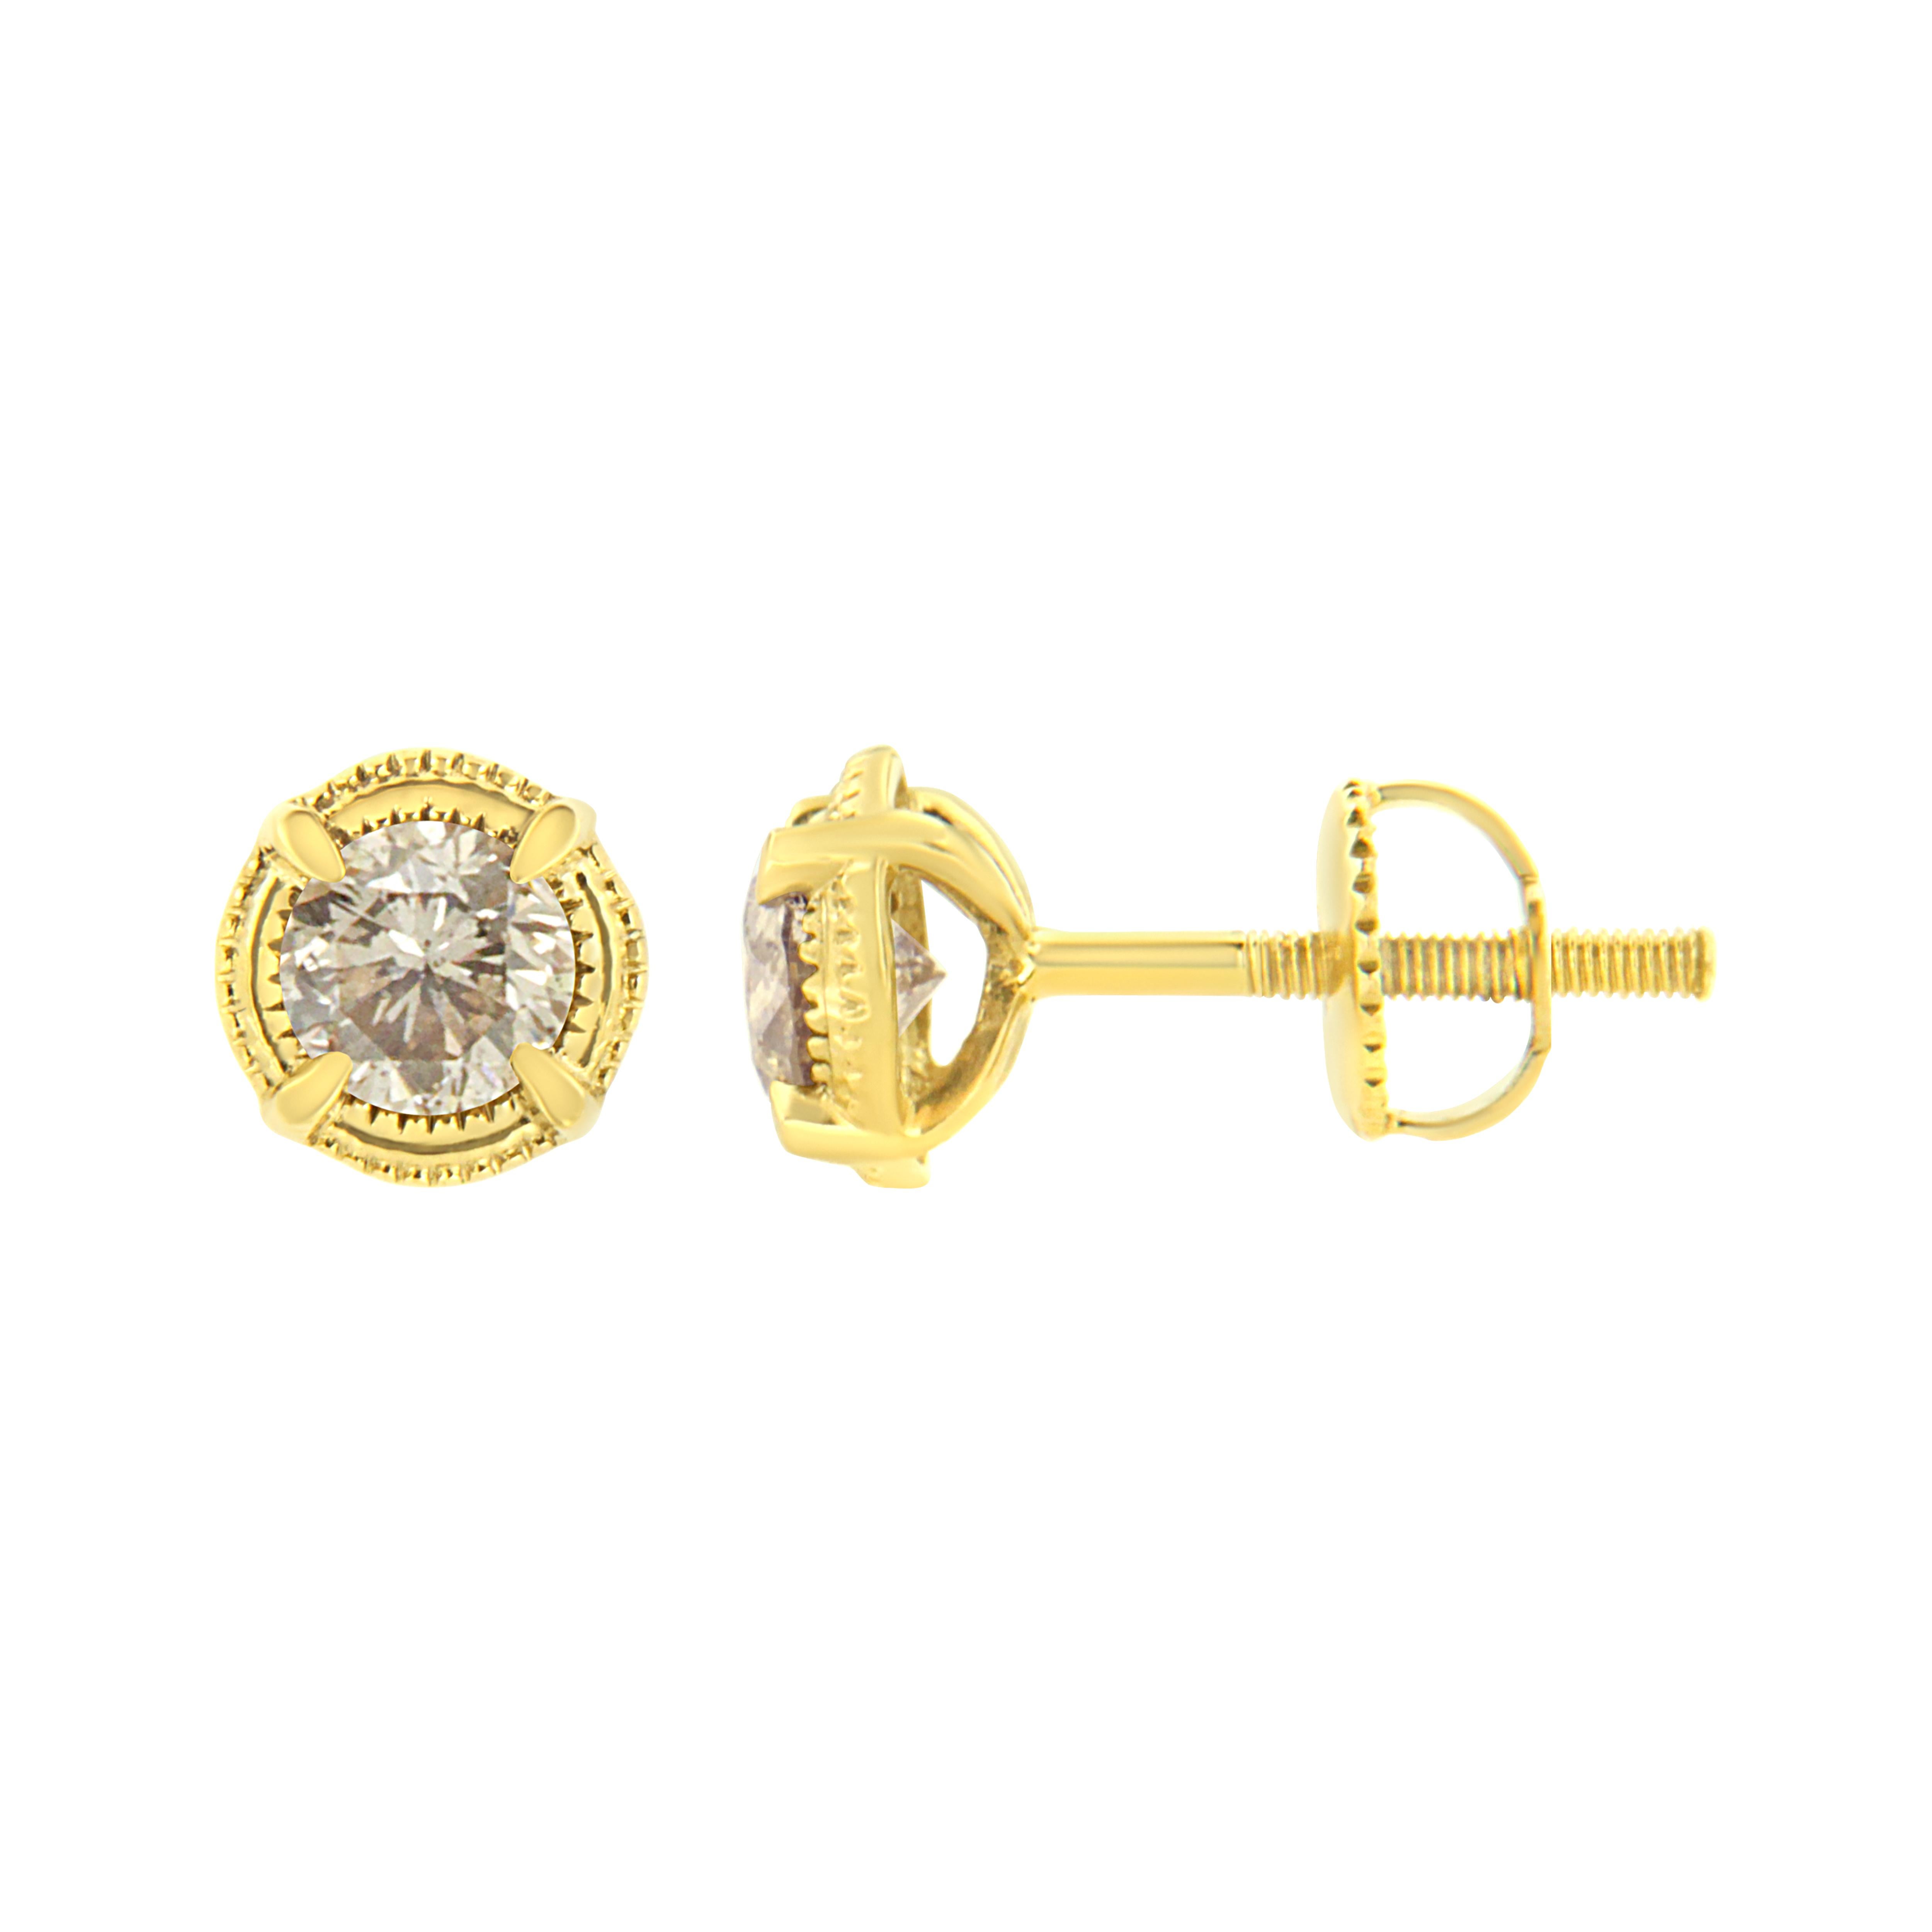 Delicate milgrain texture traces the edge of these stunning earrings crafted of genuine 14k Yellow gold plated .925 sterling silver. Diamonds are set at the center of the 4-prong design of each of these round stud earrings, for 0.75 carat of